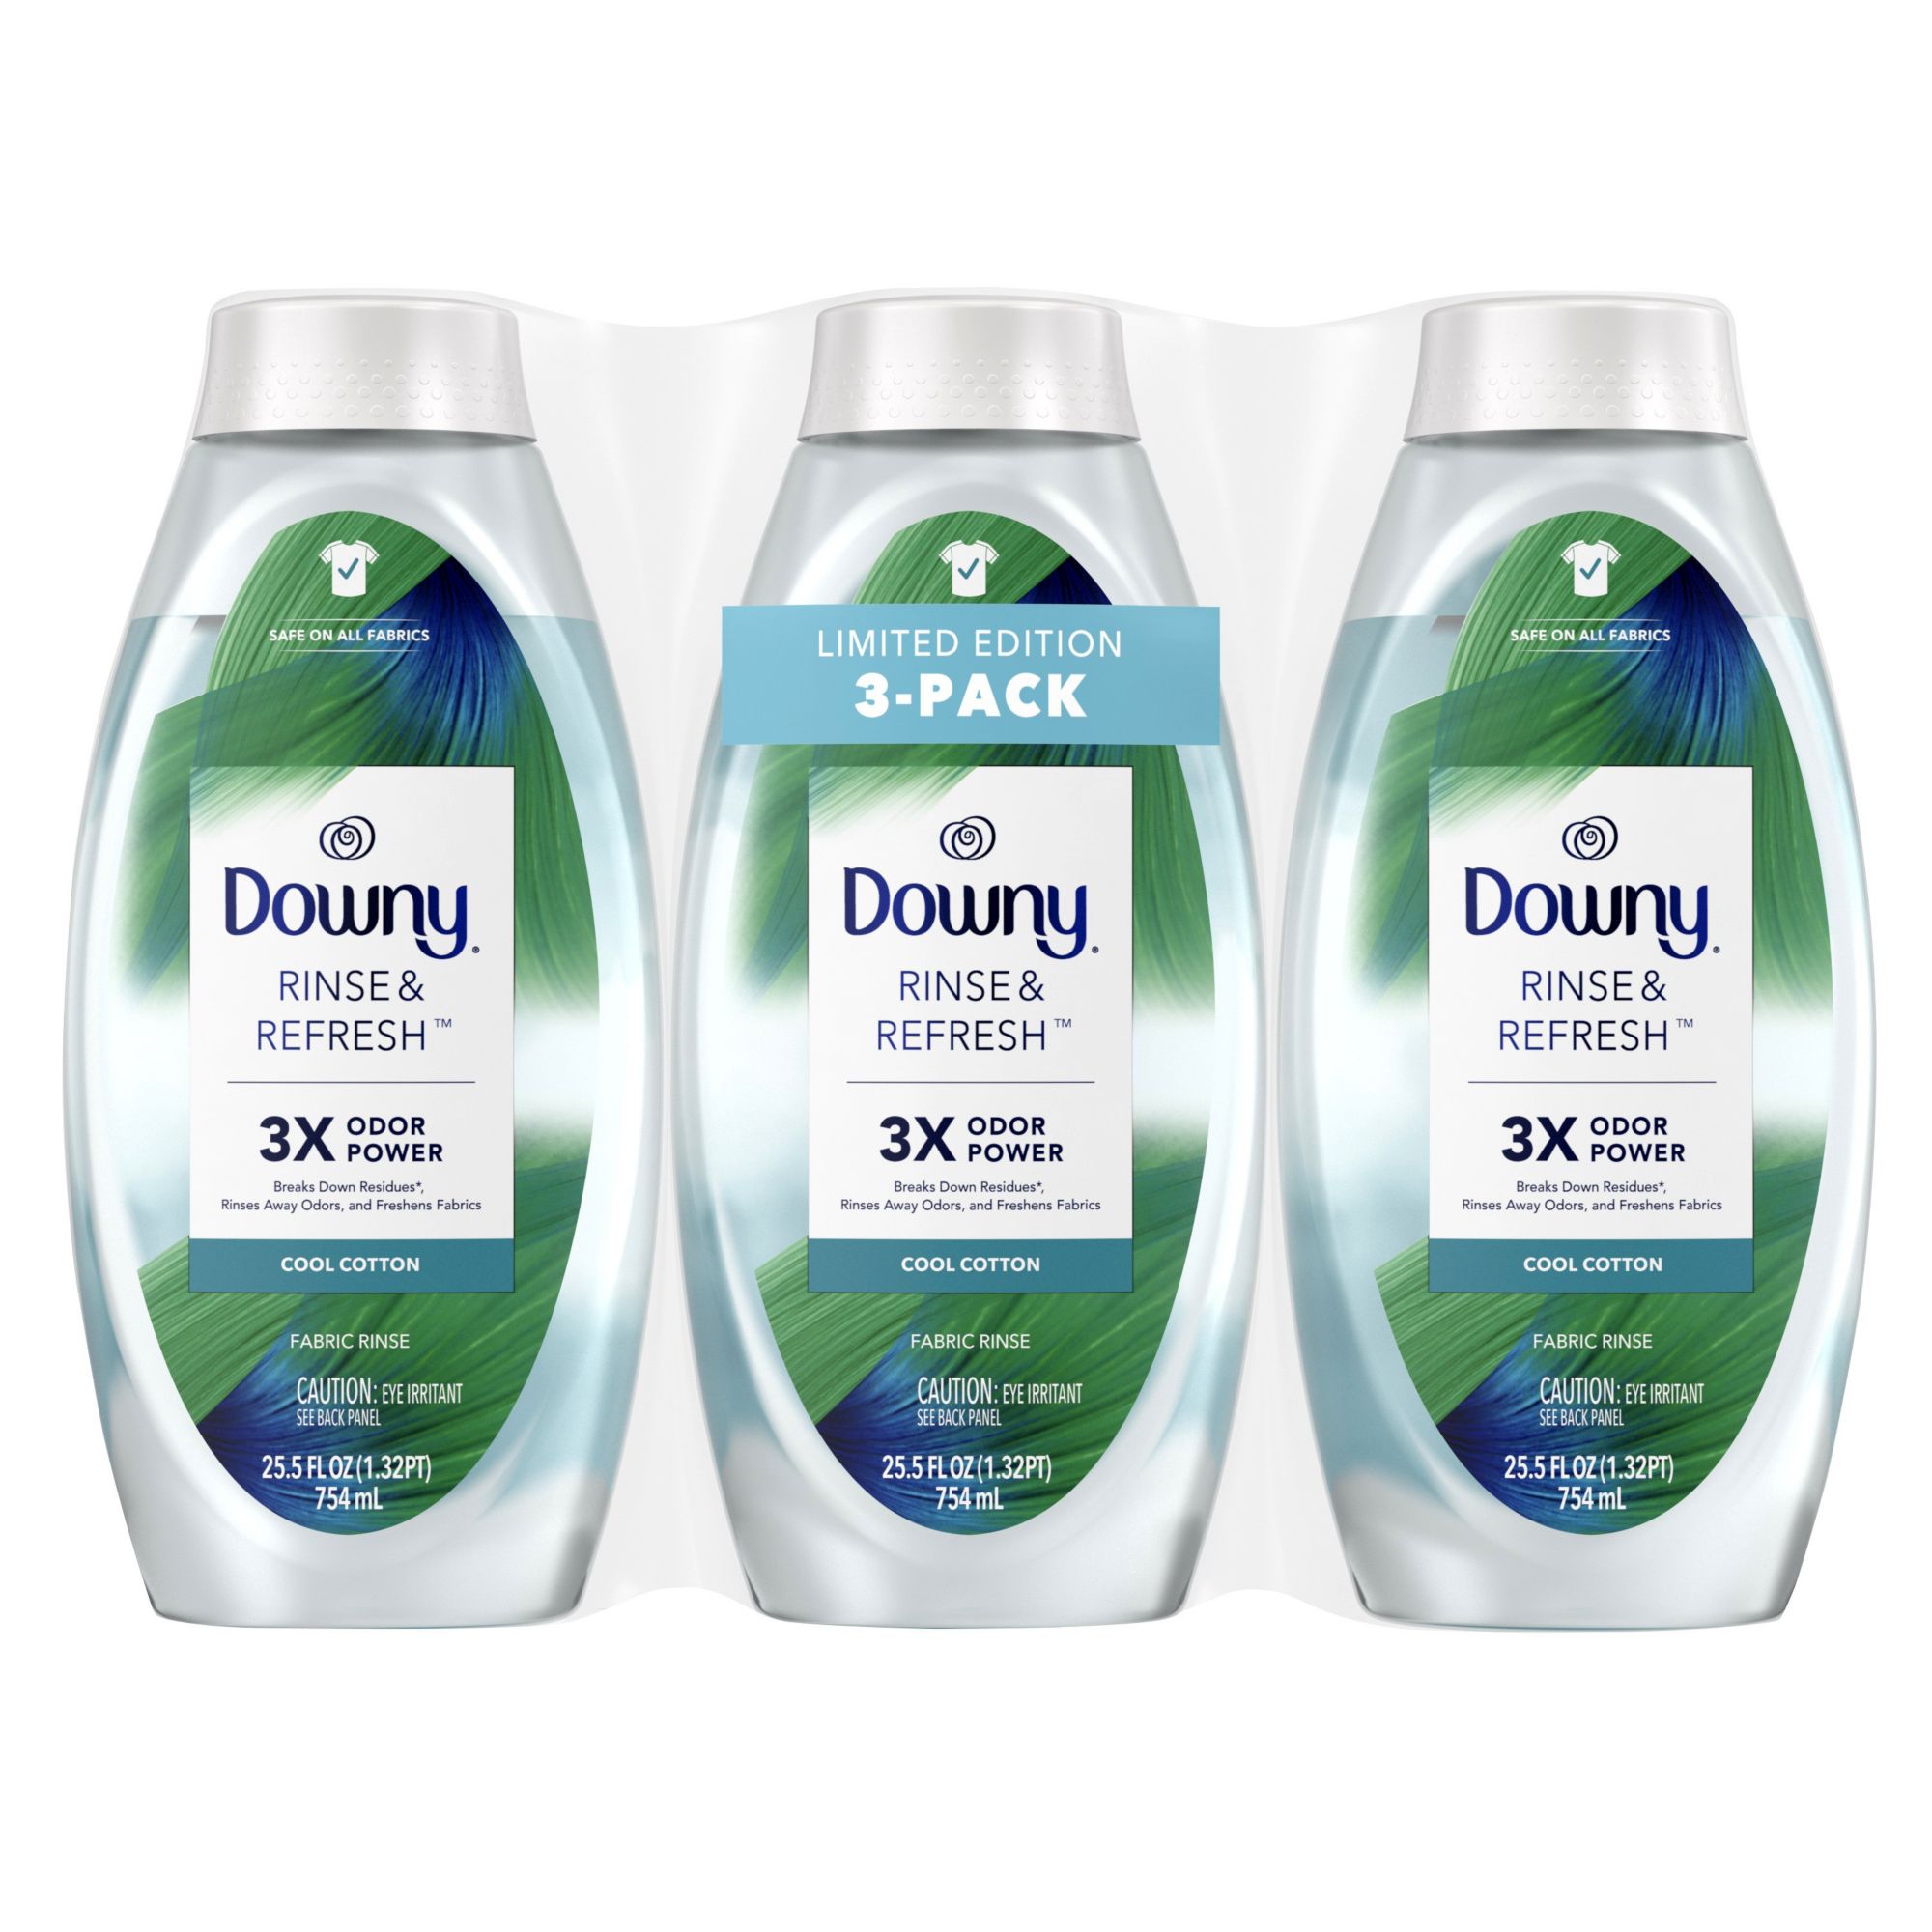 Downy Fresh Unstopables In-Wash Scent Booster Beads, 37.5 oz.